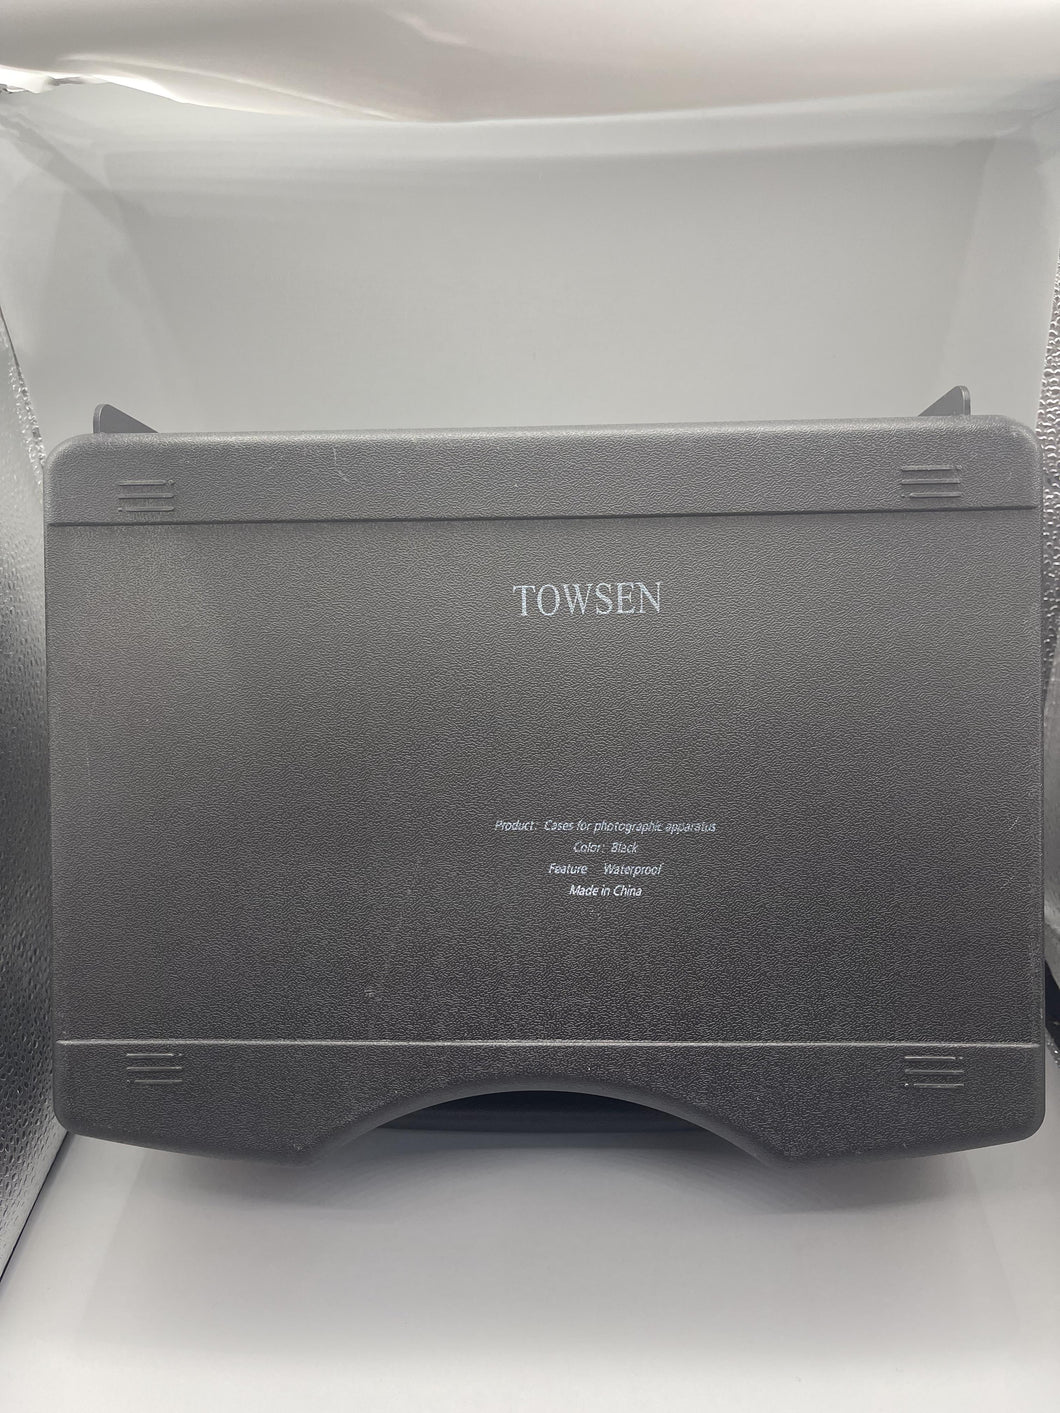 TOWSEN Cases for photographic apparatus,Hard Case with Foam - 25